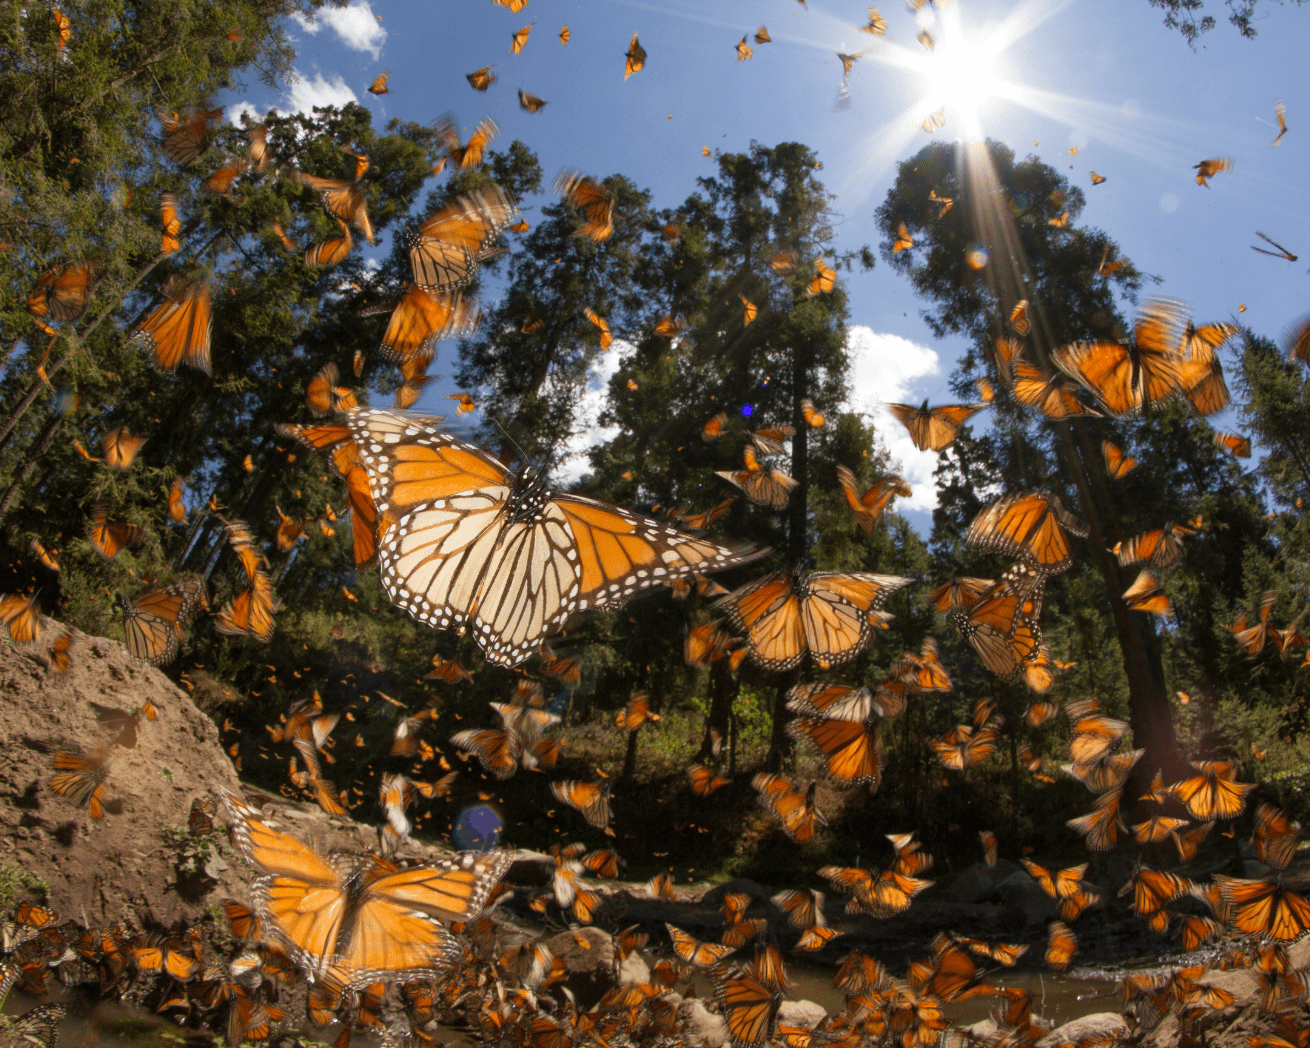 Monarch butterflies flying in a forest in the sunshine 